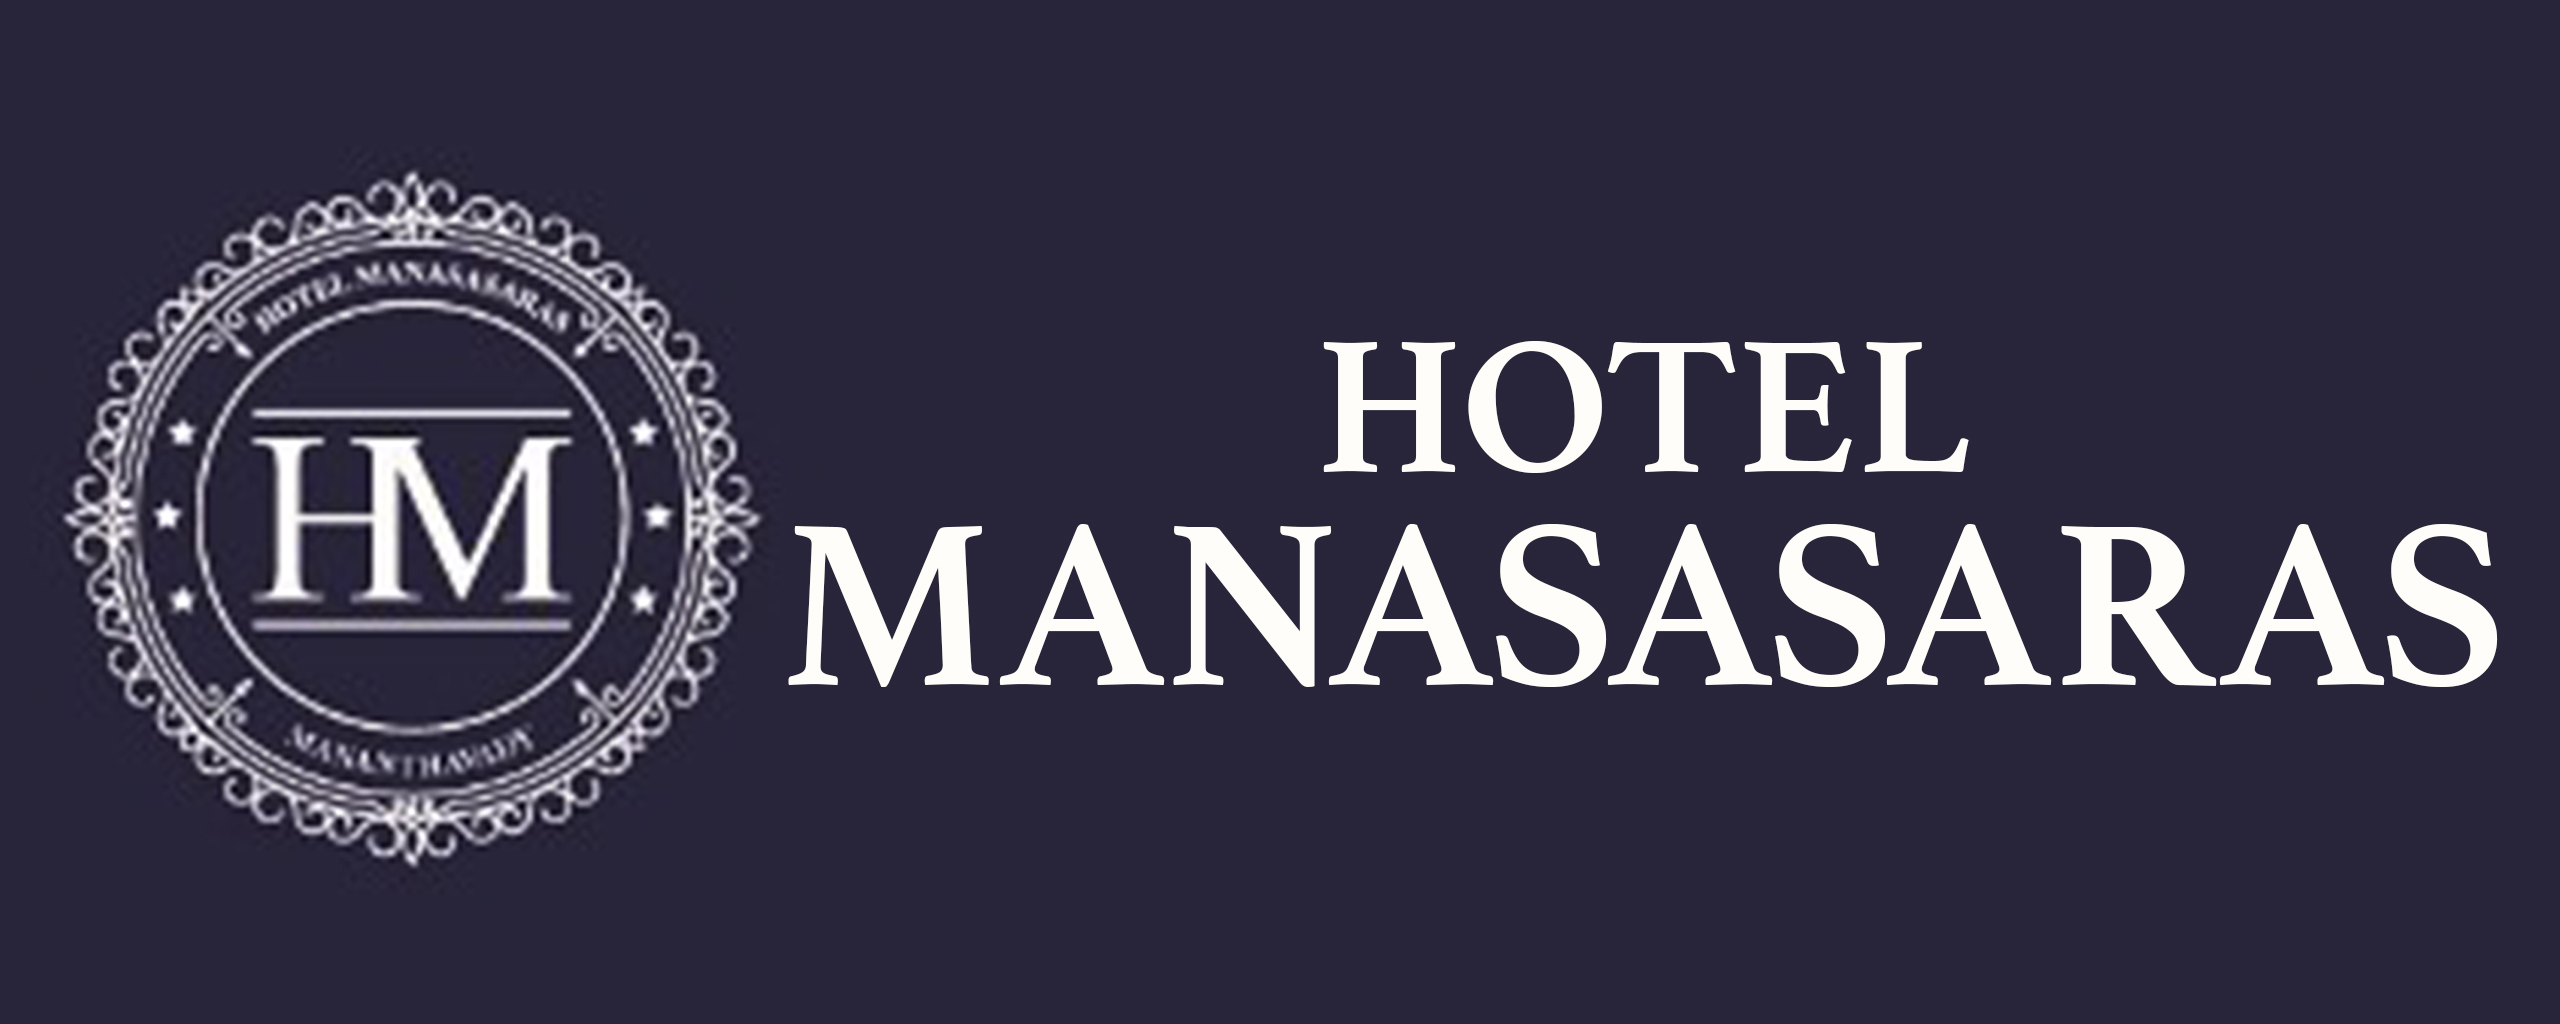 Hotel Manasasaras Wayanad is a 4-star hotel that offers a perfect stay for modern travelers with restaurants, bars, banquet halls amazing facilities. Book now!